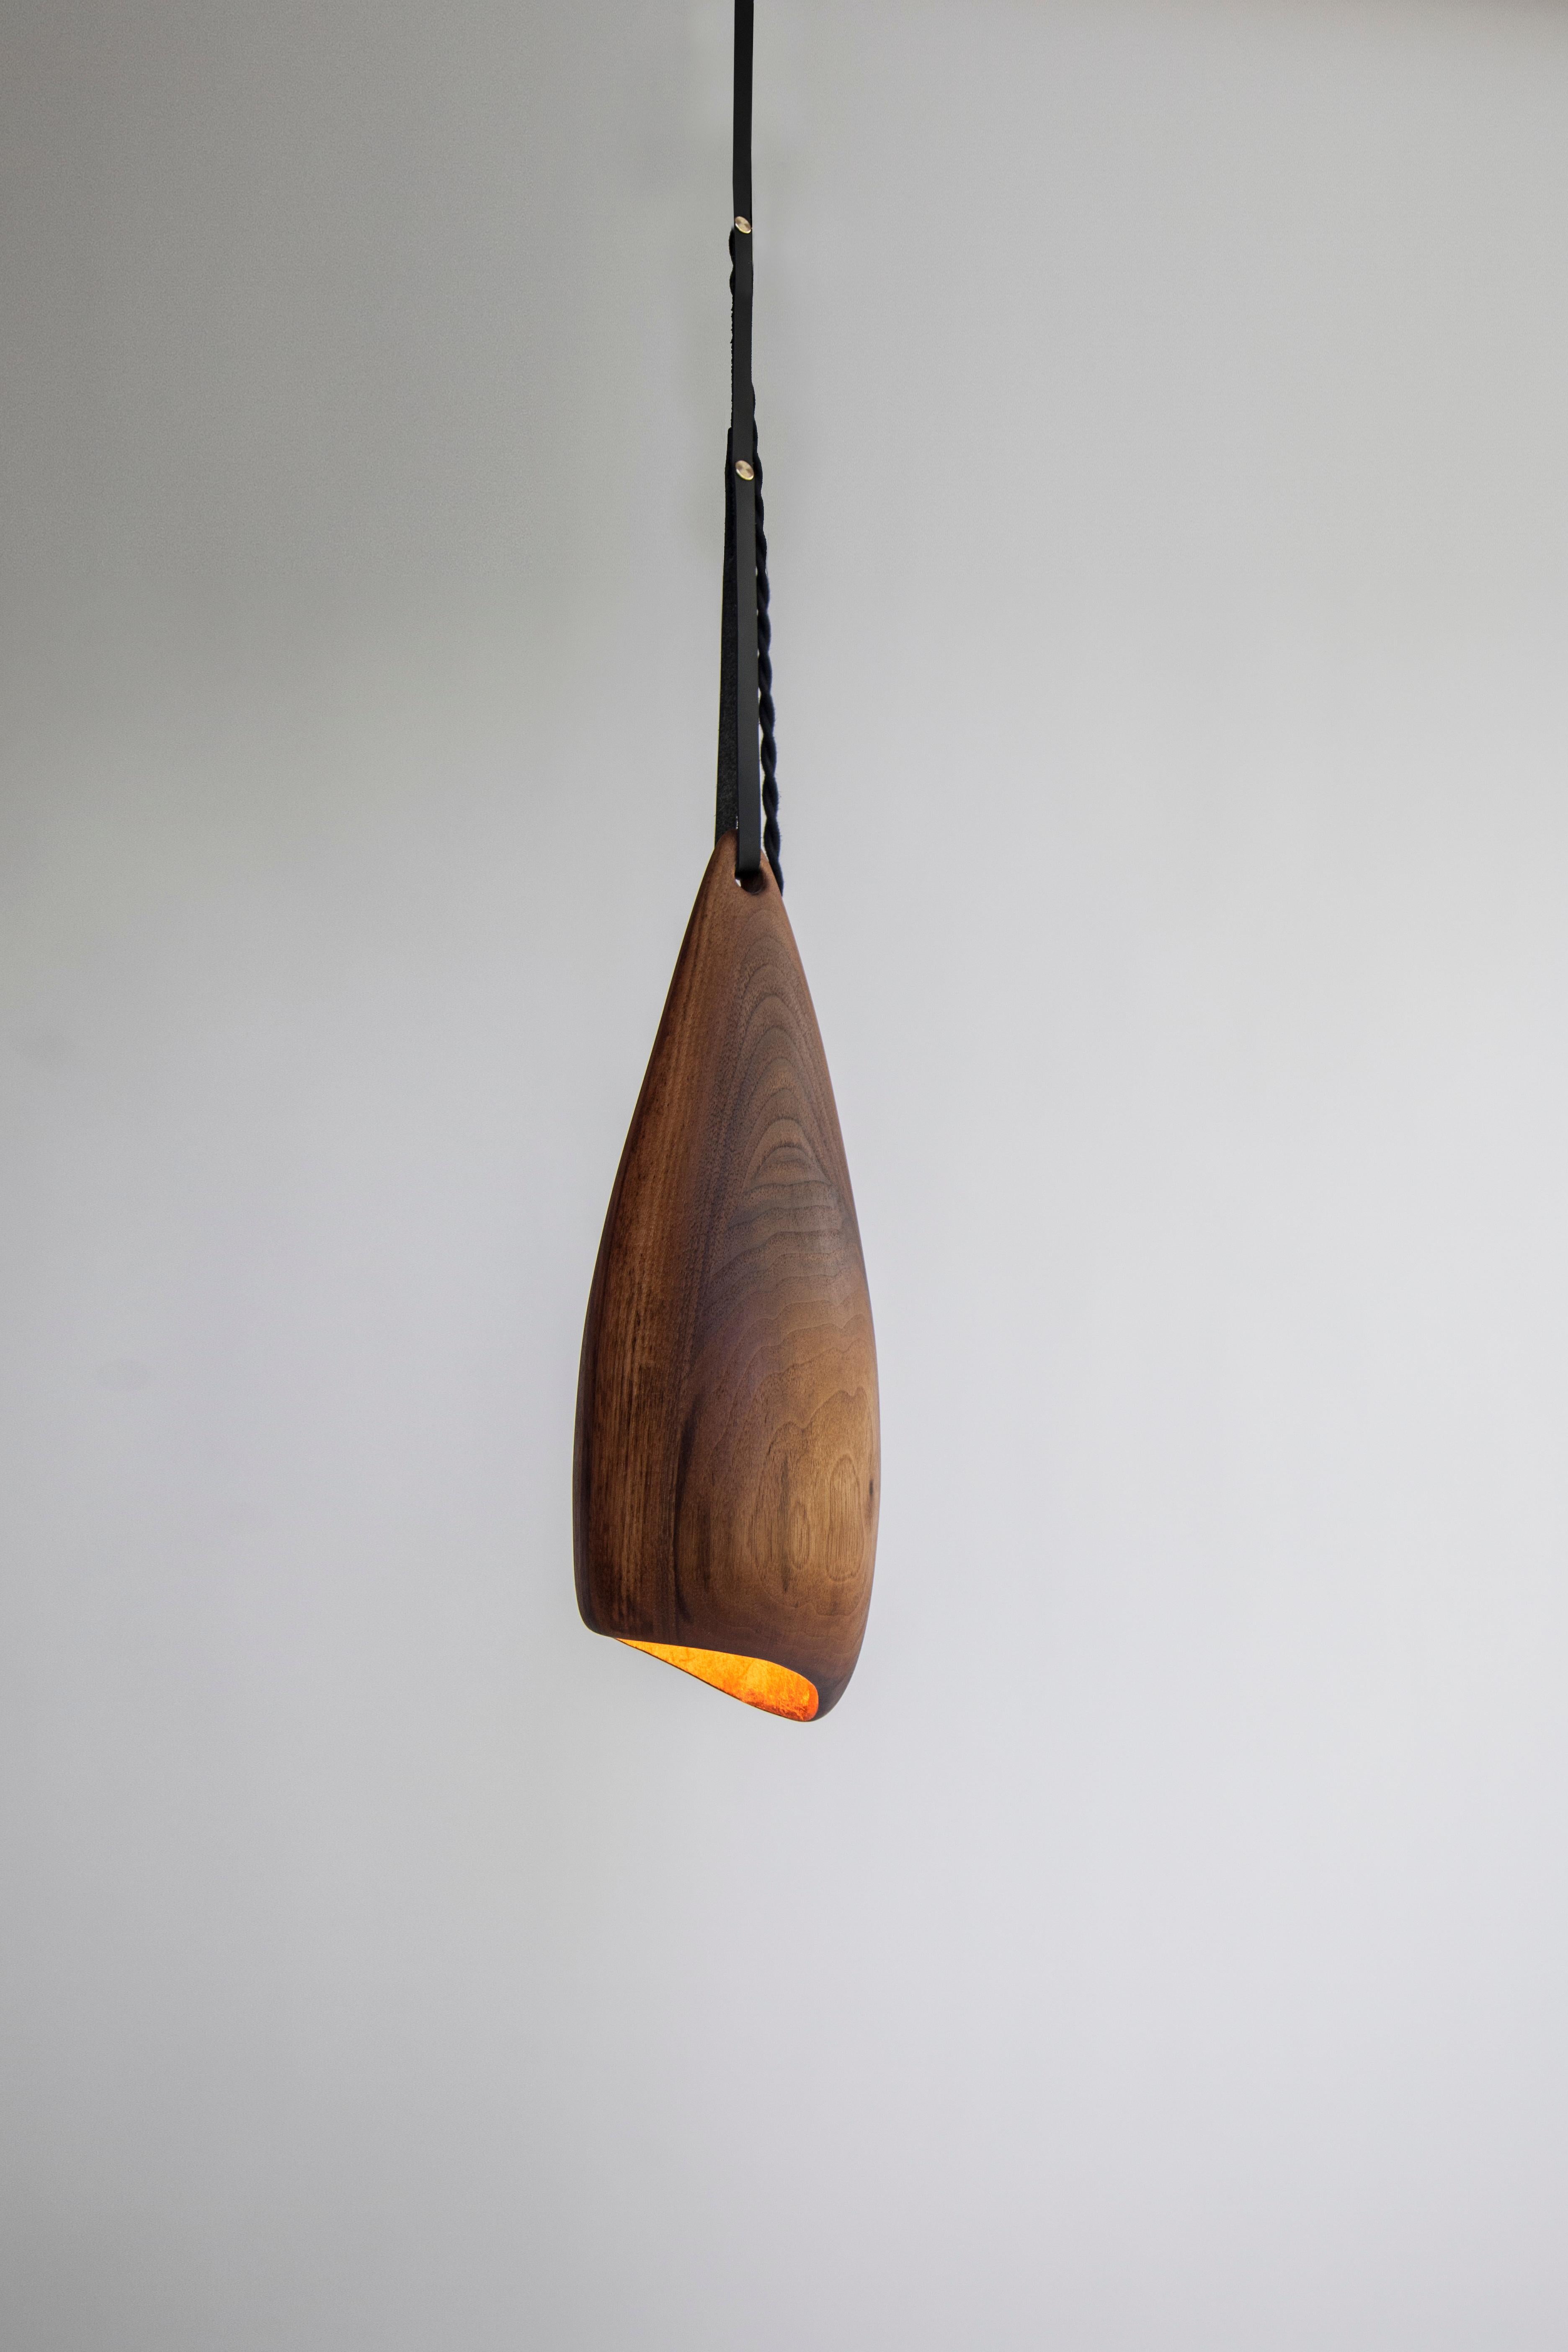 Rosa Contemporary carved Walnut hanging lamps by Nadine Hajjar For Sale 7